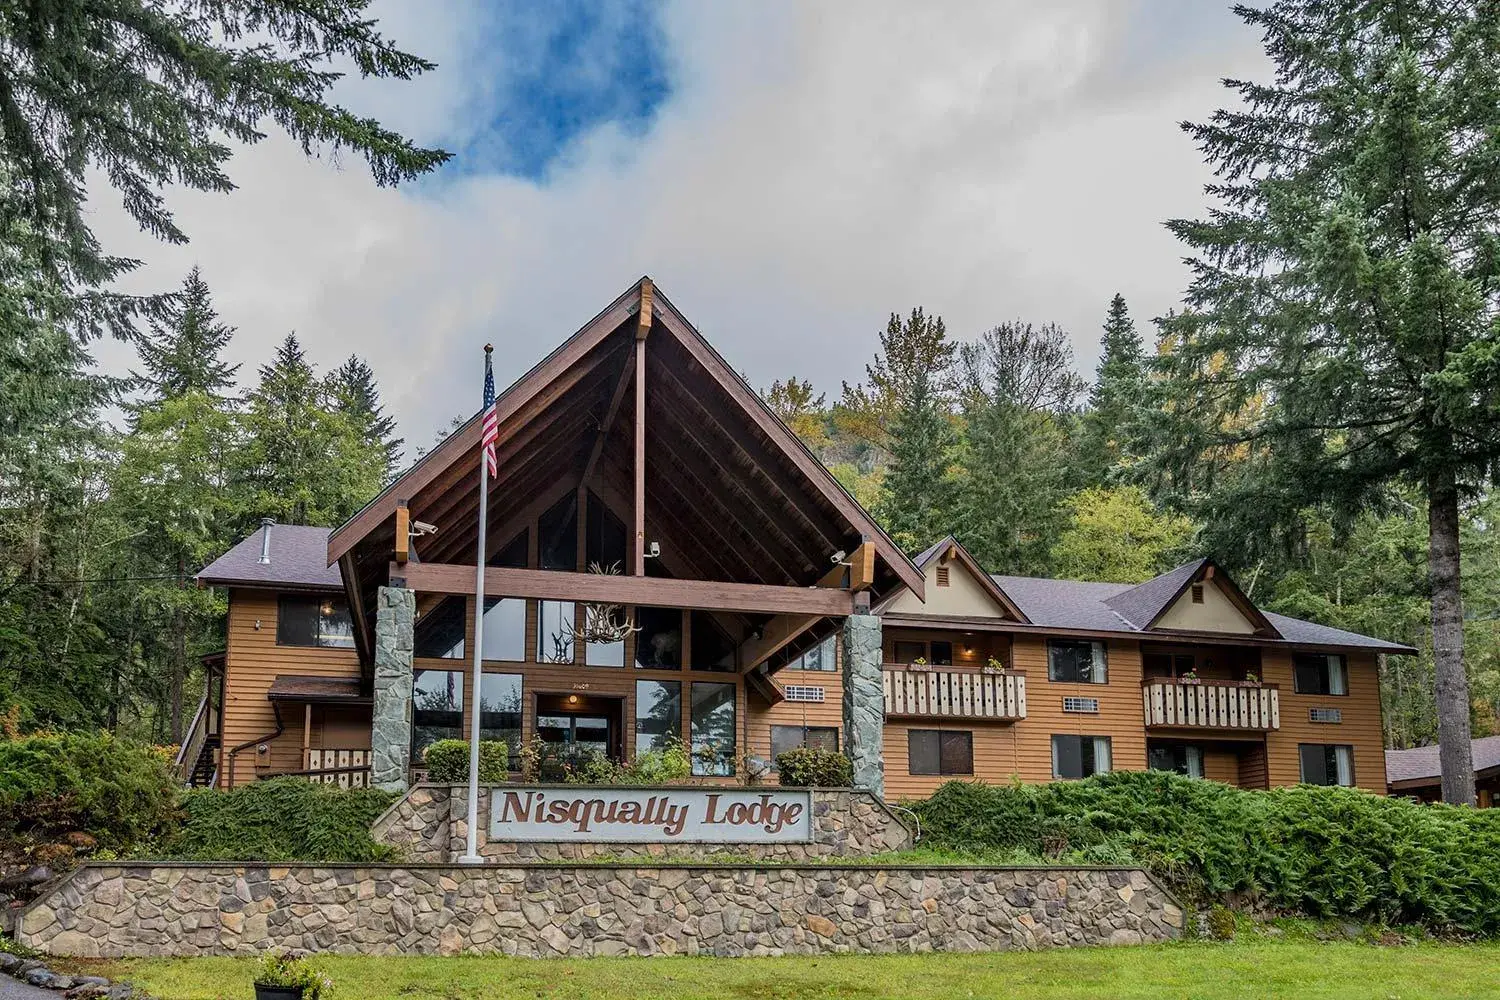 Property Building in Nisqually Lodge